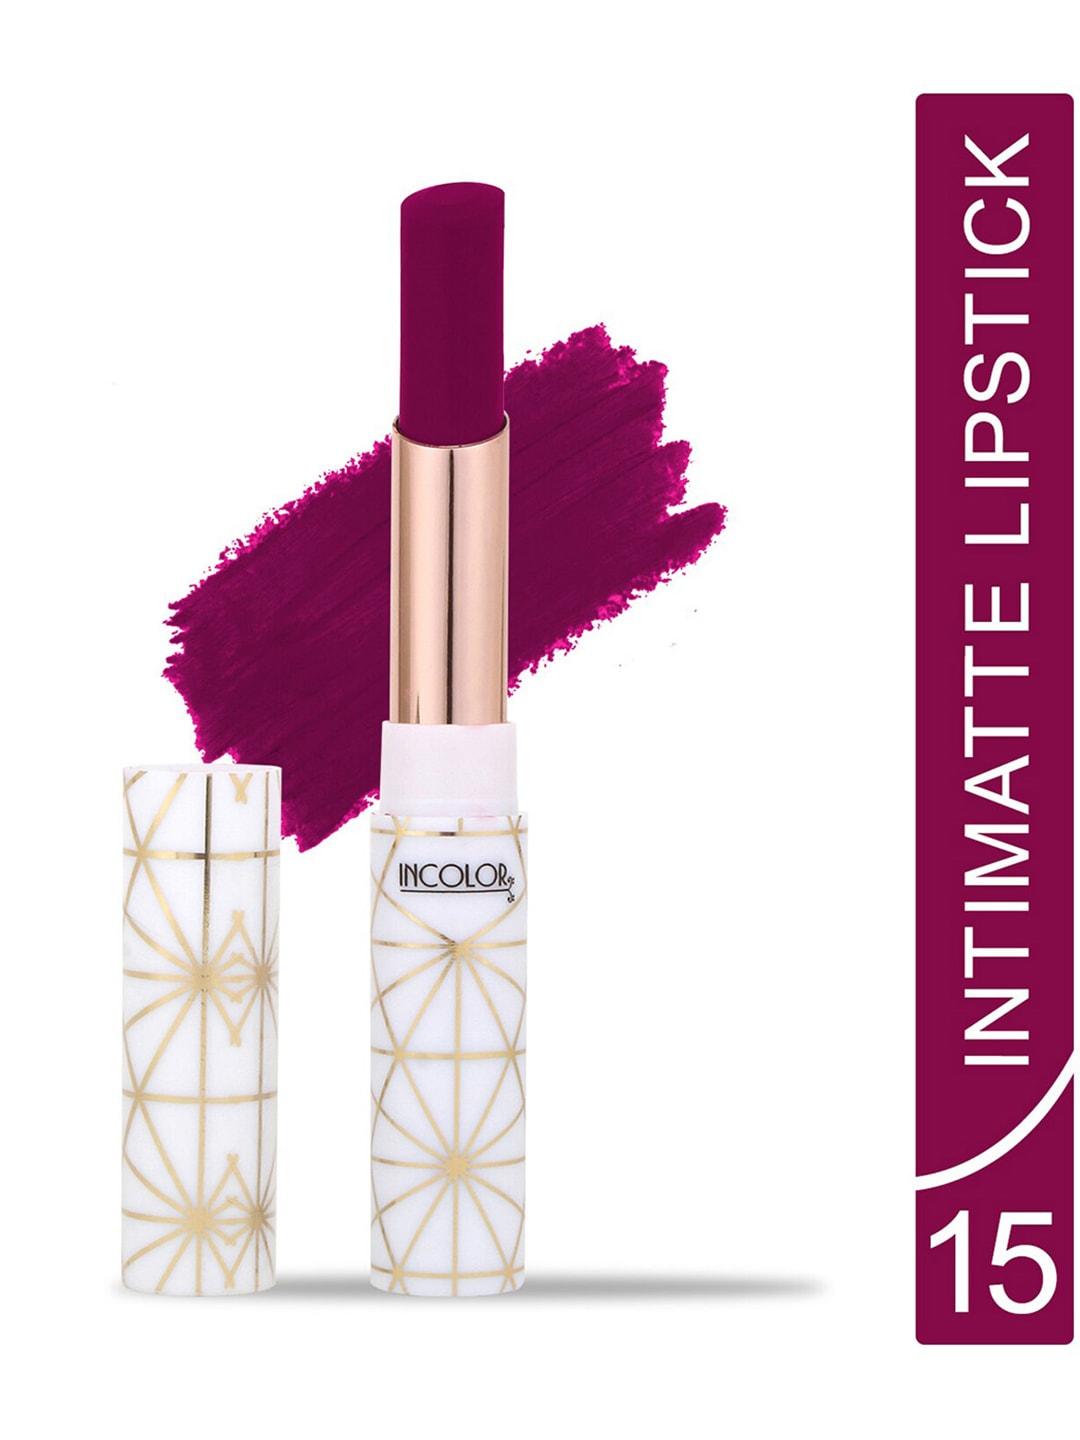 incolor intimatte lightweight long lasting smooth texture lipstick 2.3g - shade 15